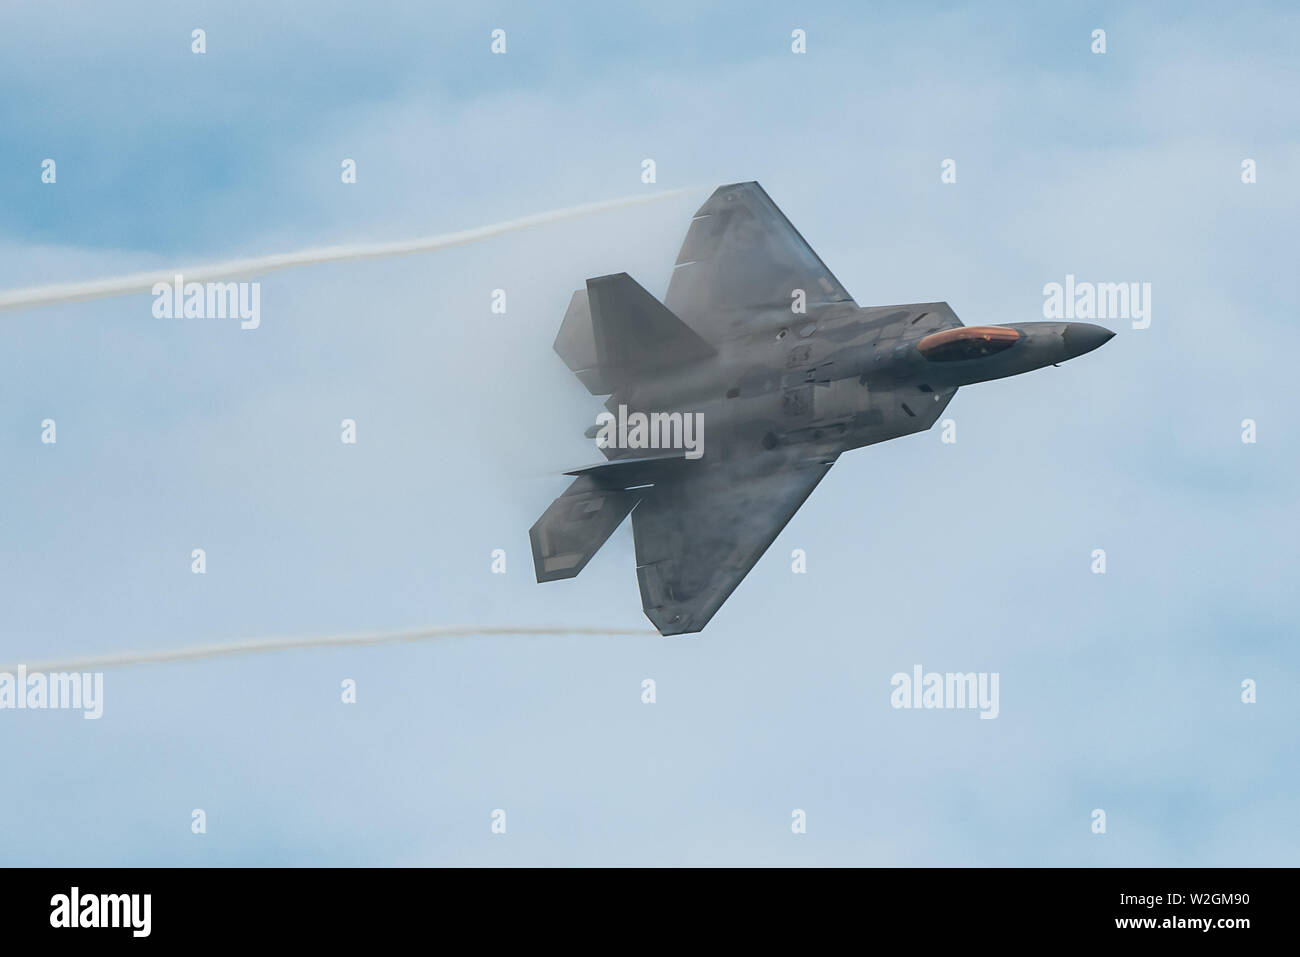 U.S. Air Force Maj. Paul Lopez, F-22 Demo Team commander, performs a dedication pass in Battle Creek, Mich. for the Field of Flight air show July 7, 2019. Representing the U.S. Air Force and Air Combat Command, the F-22 Demo Team travels to 25 air shows a season to showcase the performance and capabilities of the world's premier 5th-generation fighter. (U.S. Air Force photo by 2nd Lt. Samuel Eckholm) Stock Photo